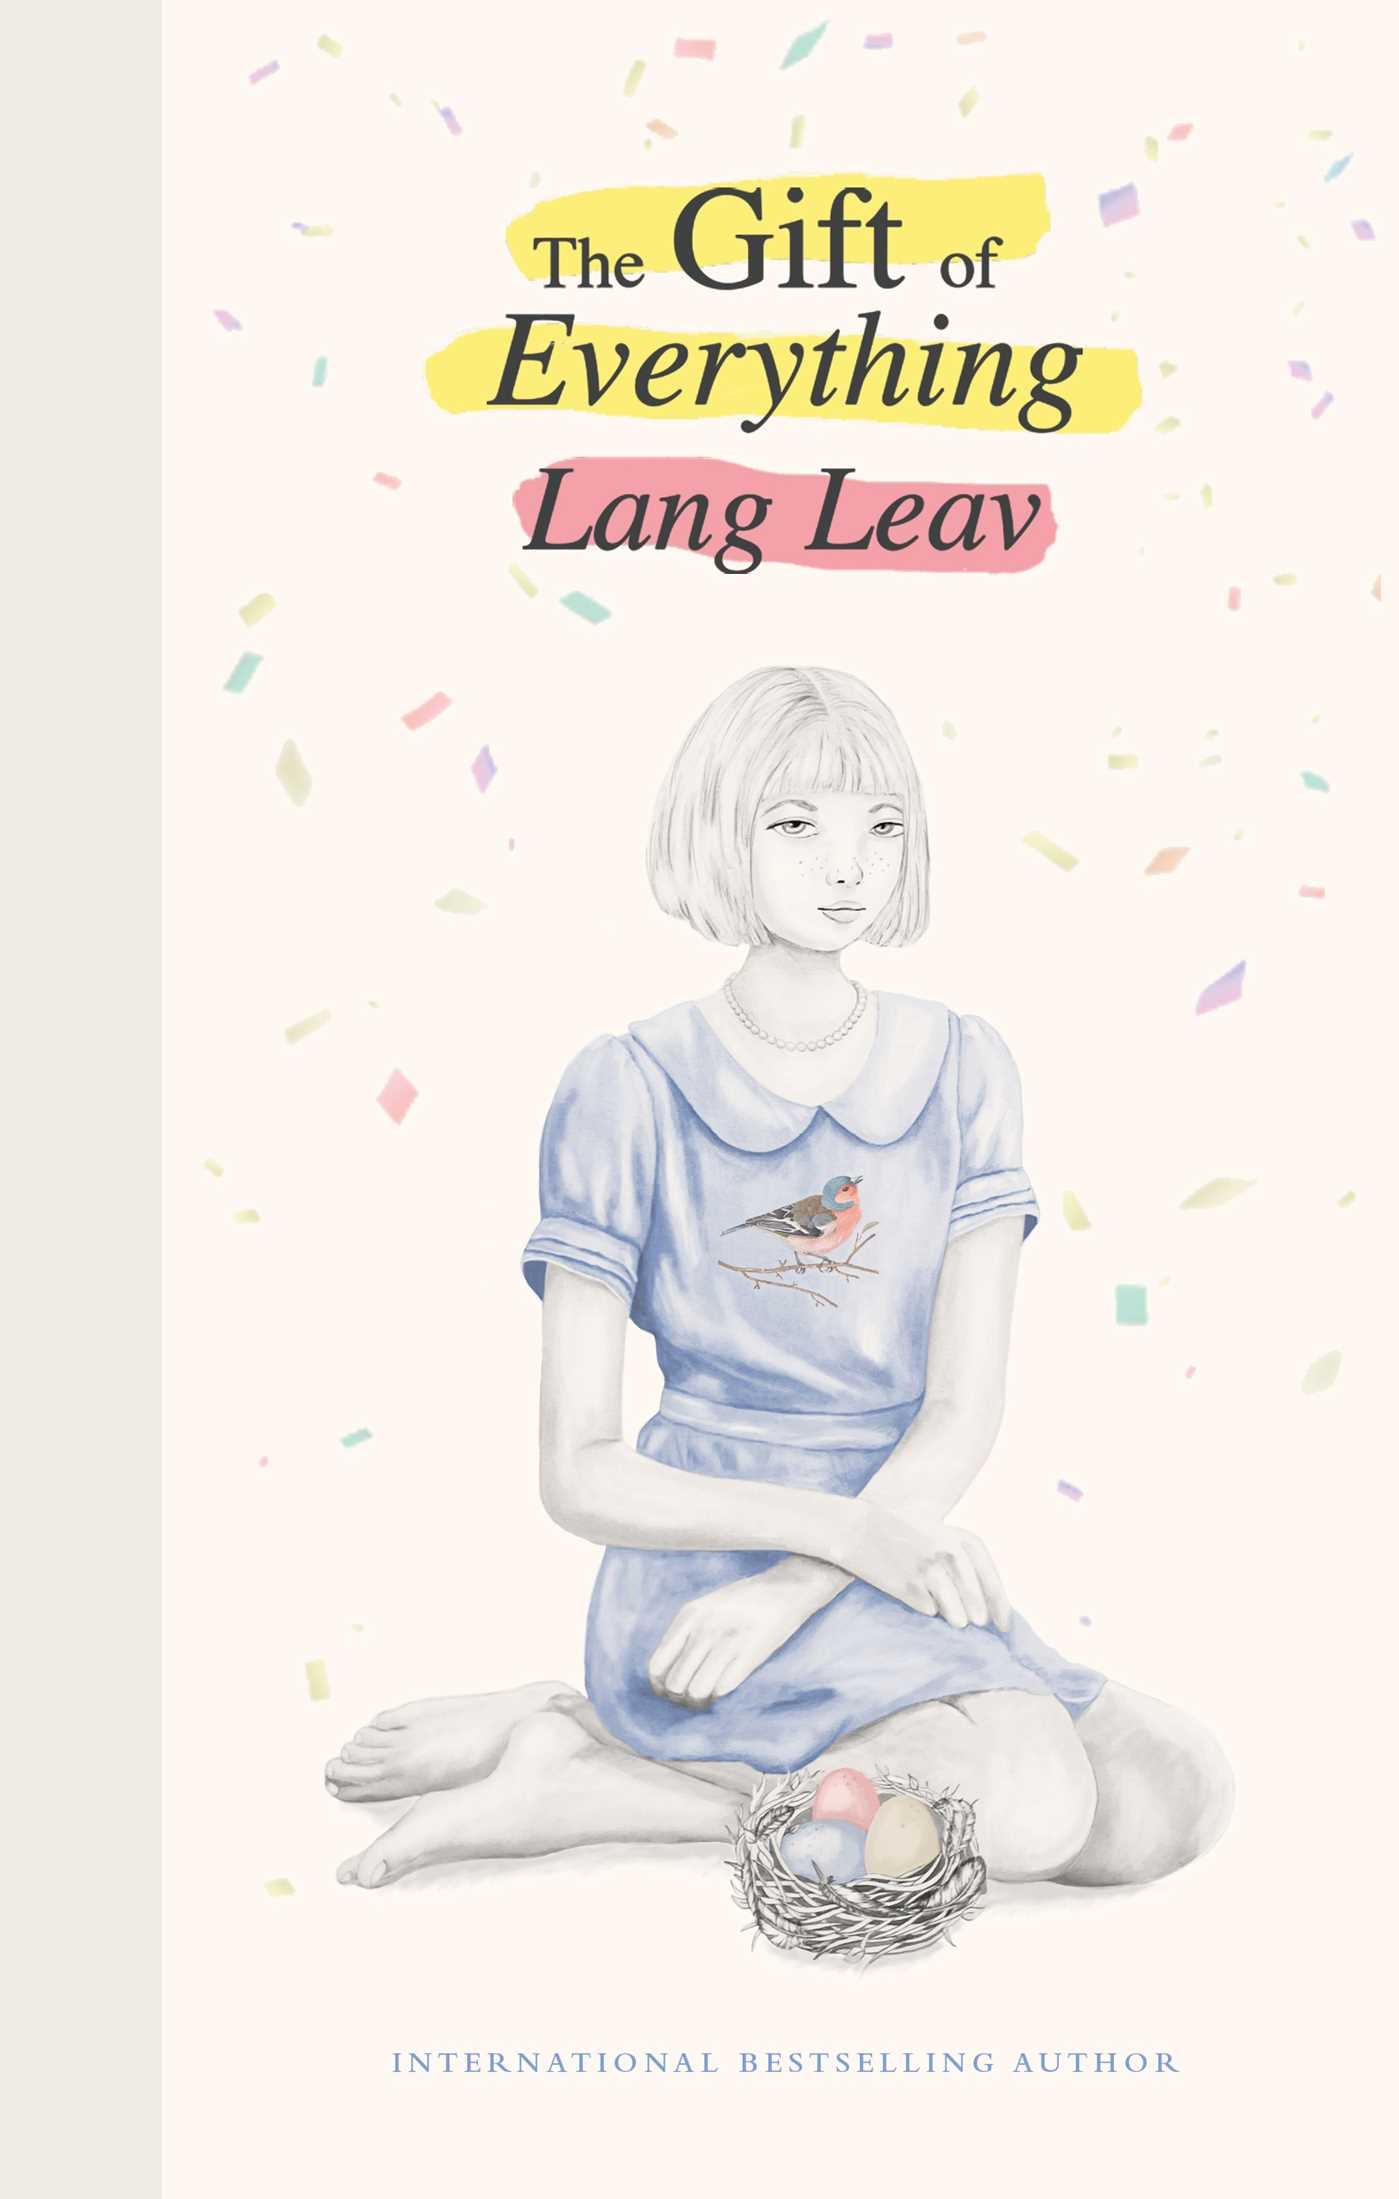 Cover of "The Gift of Everything" by Lang Leav